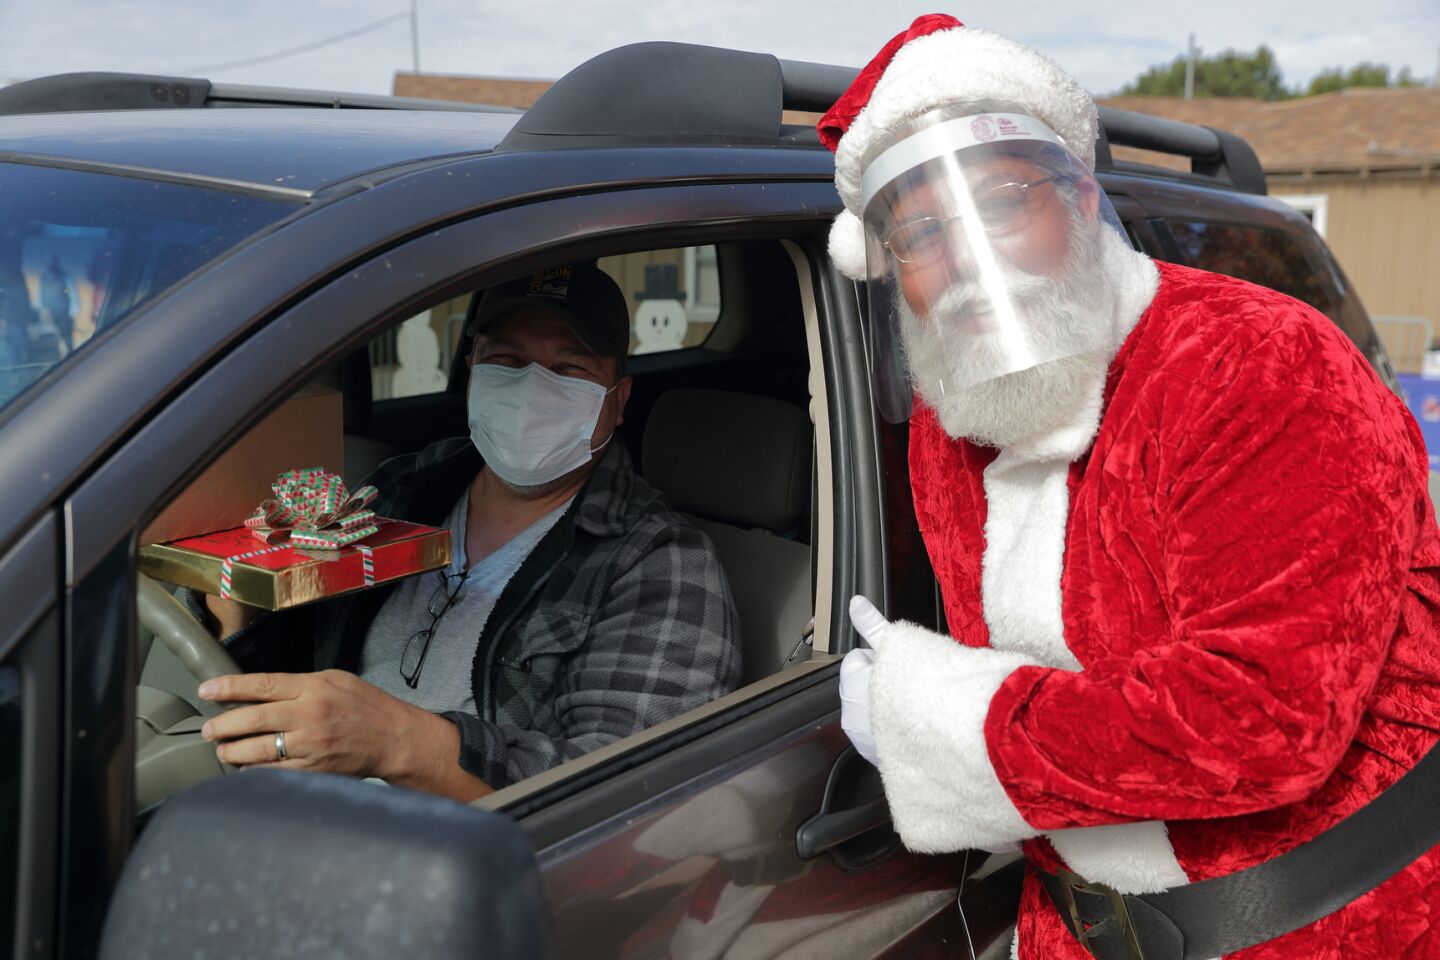 Santa greets a client with AniMeals gifts